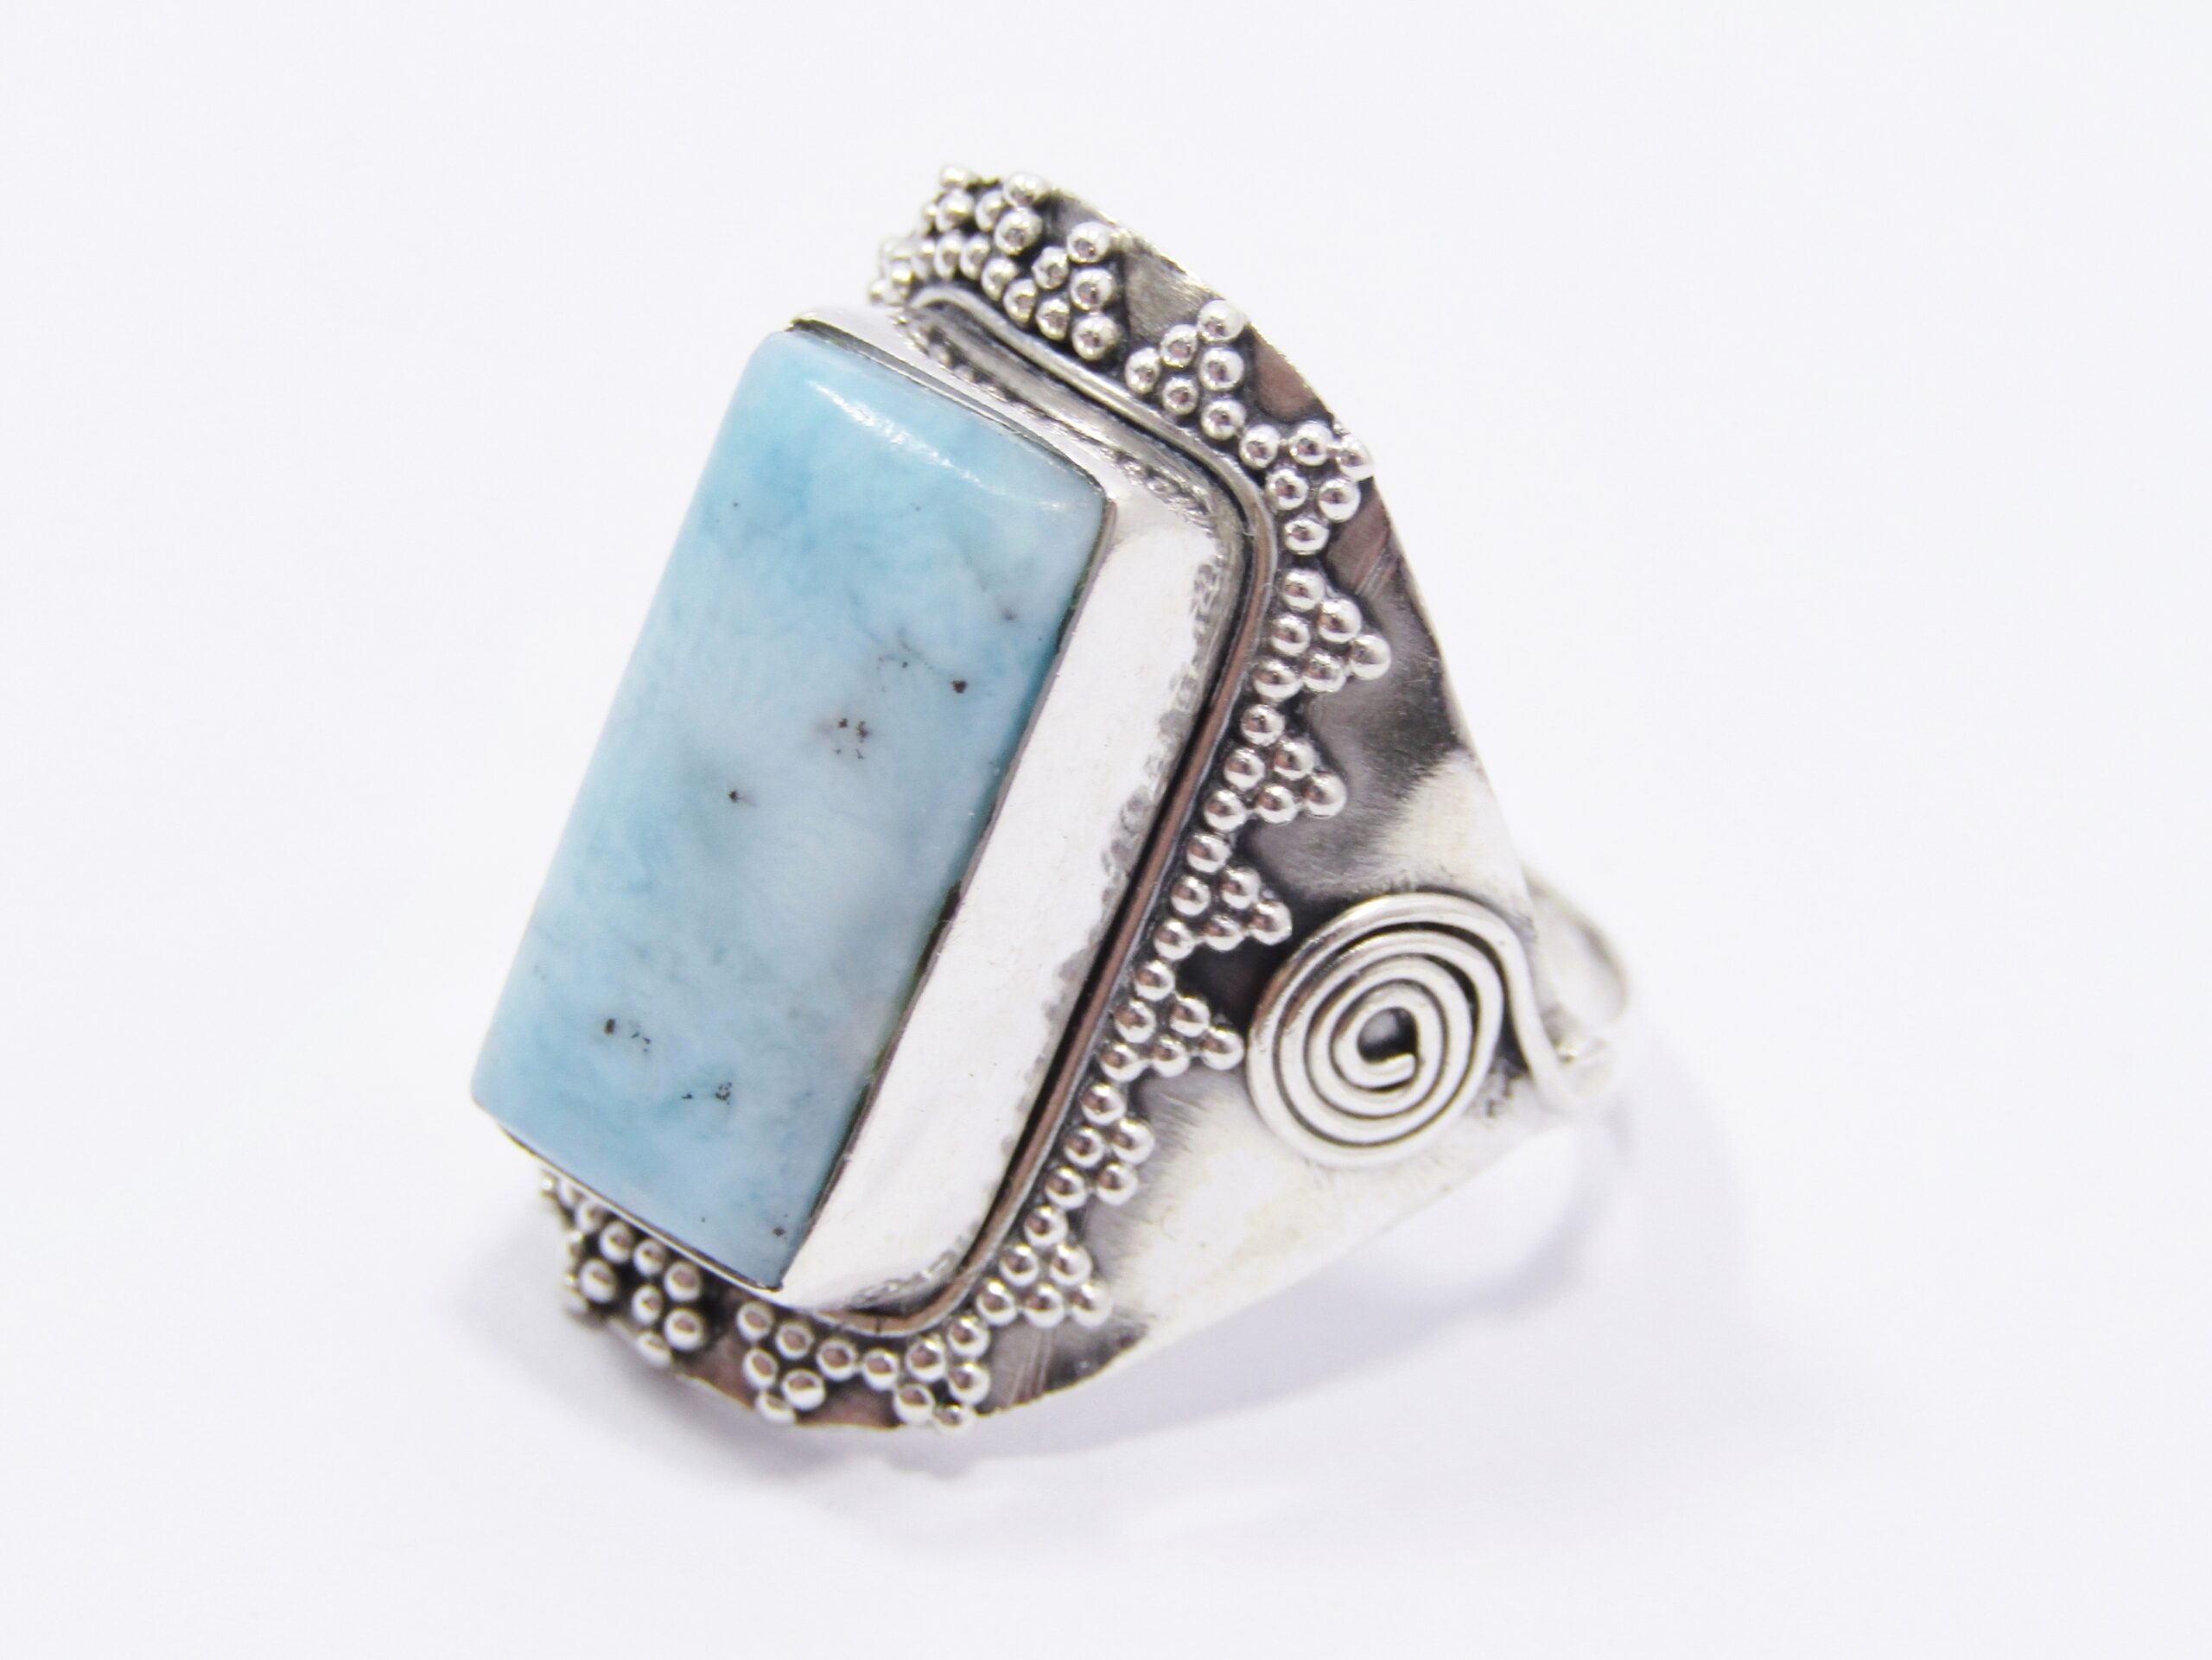 A Gorgeous Chunky Larimar Gemstone Ring in Sterling Silver.